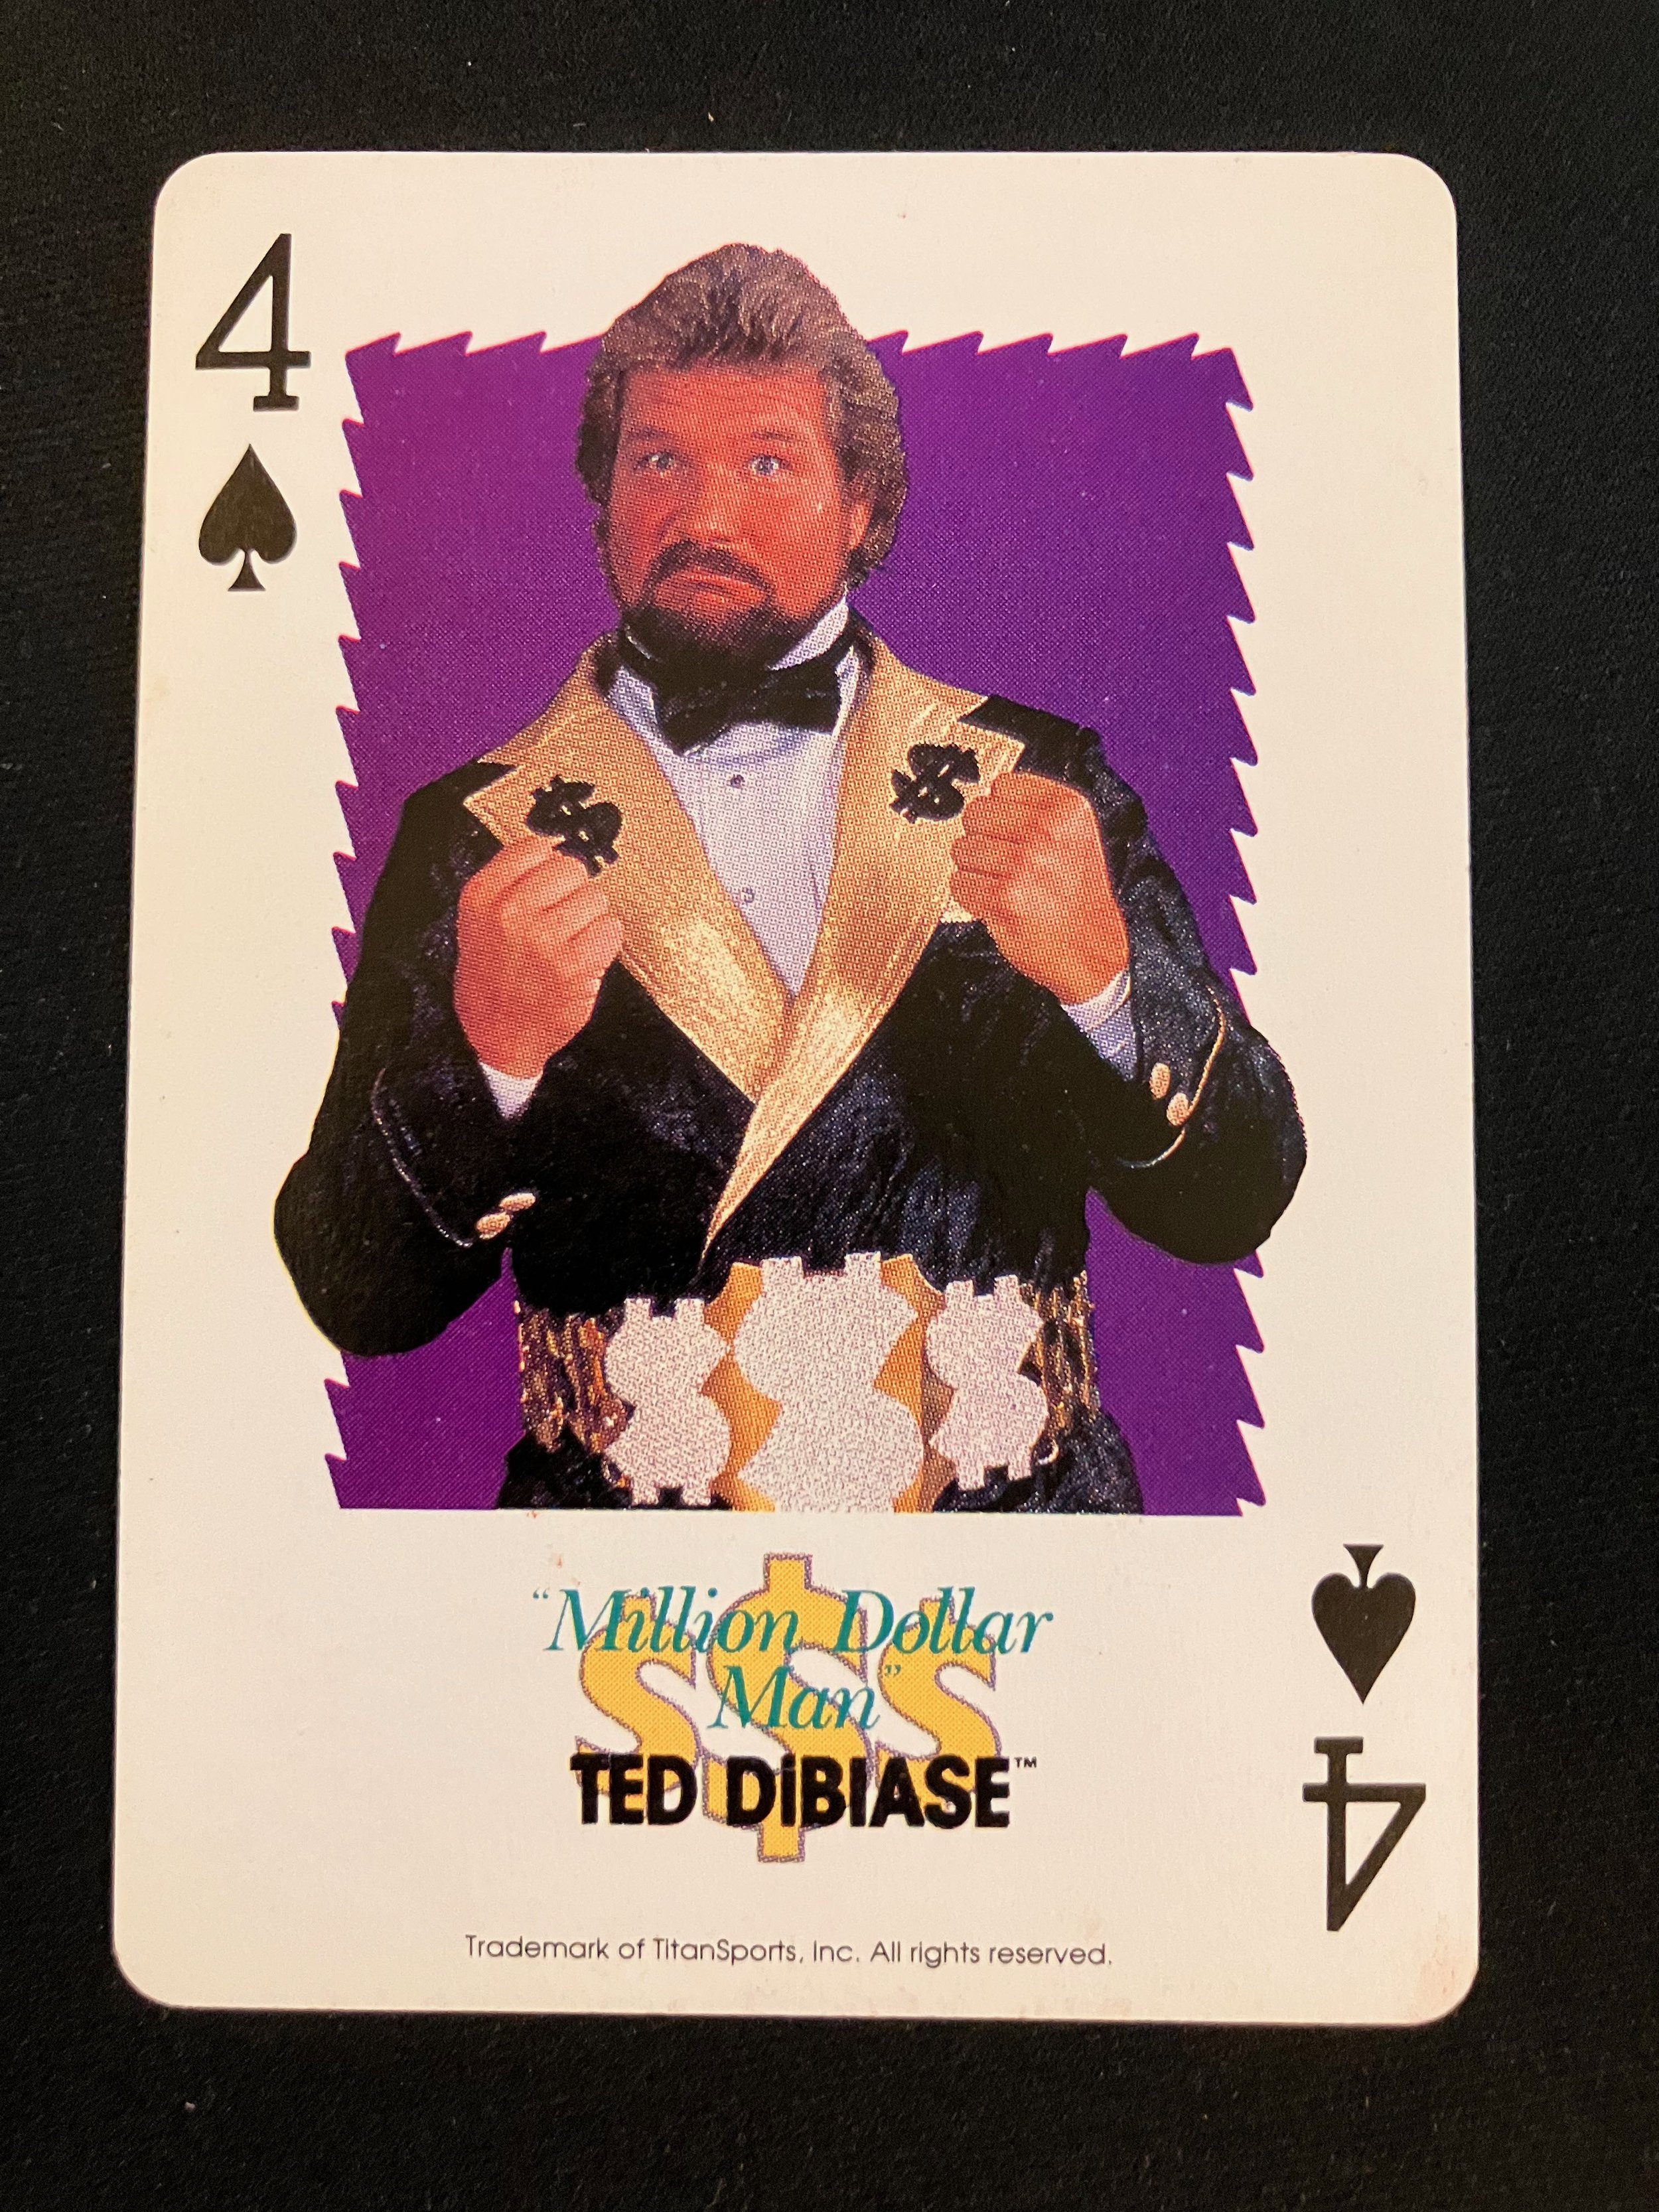 4 of Spades - Ted Dibiase